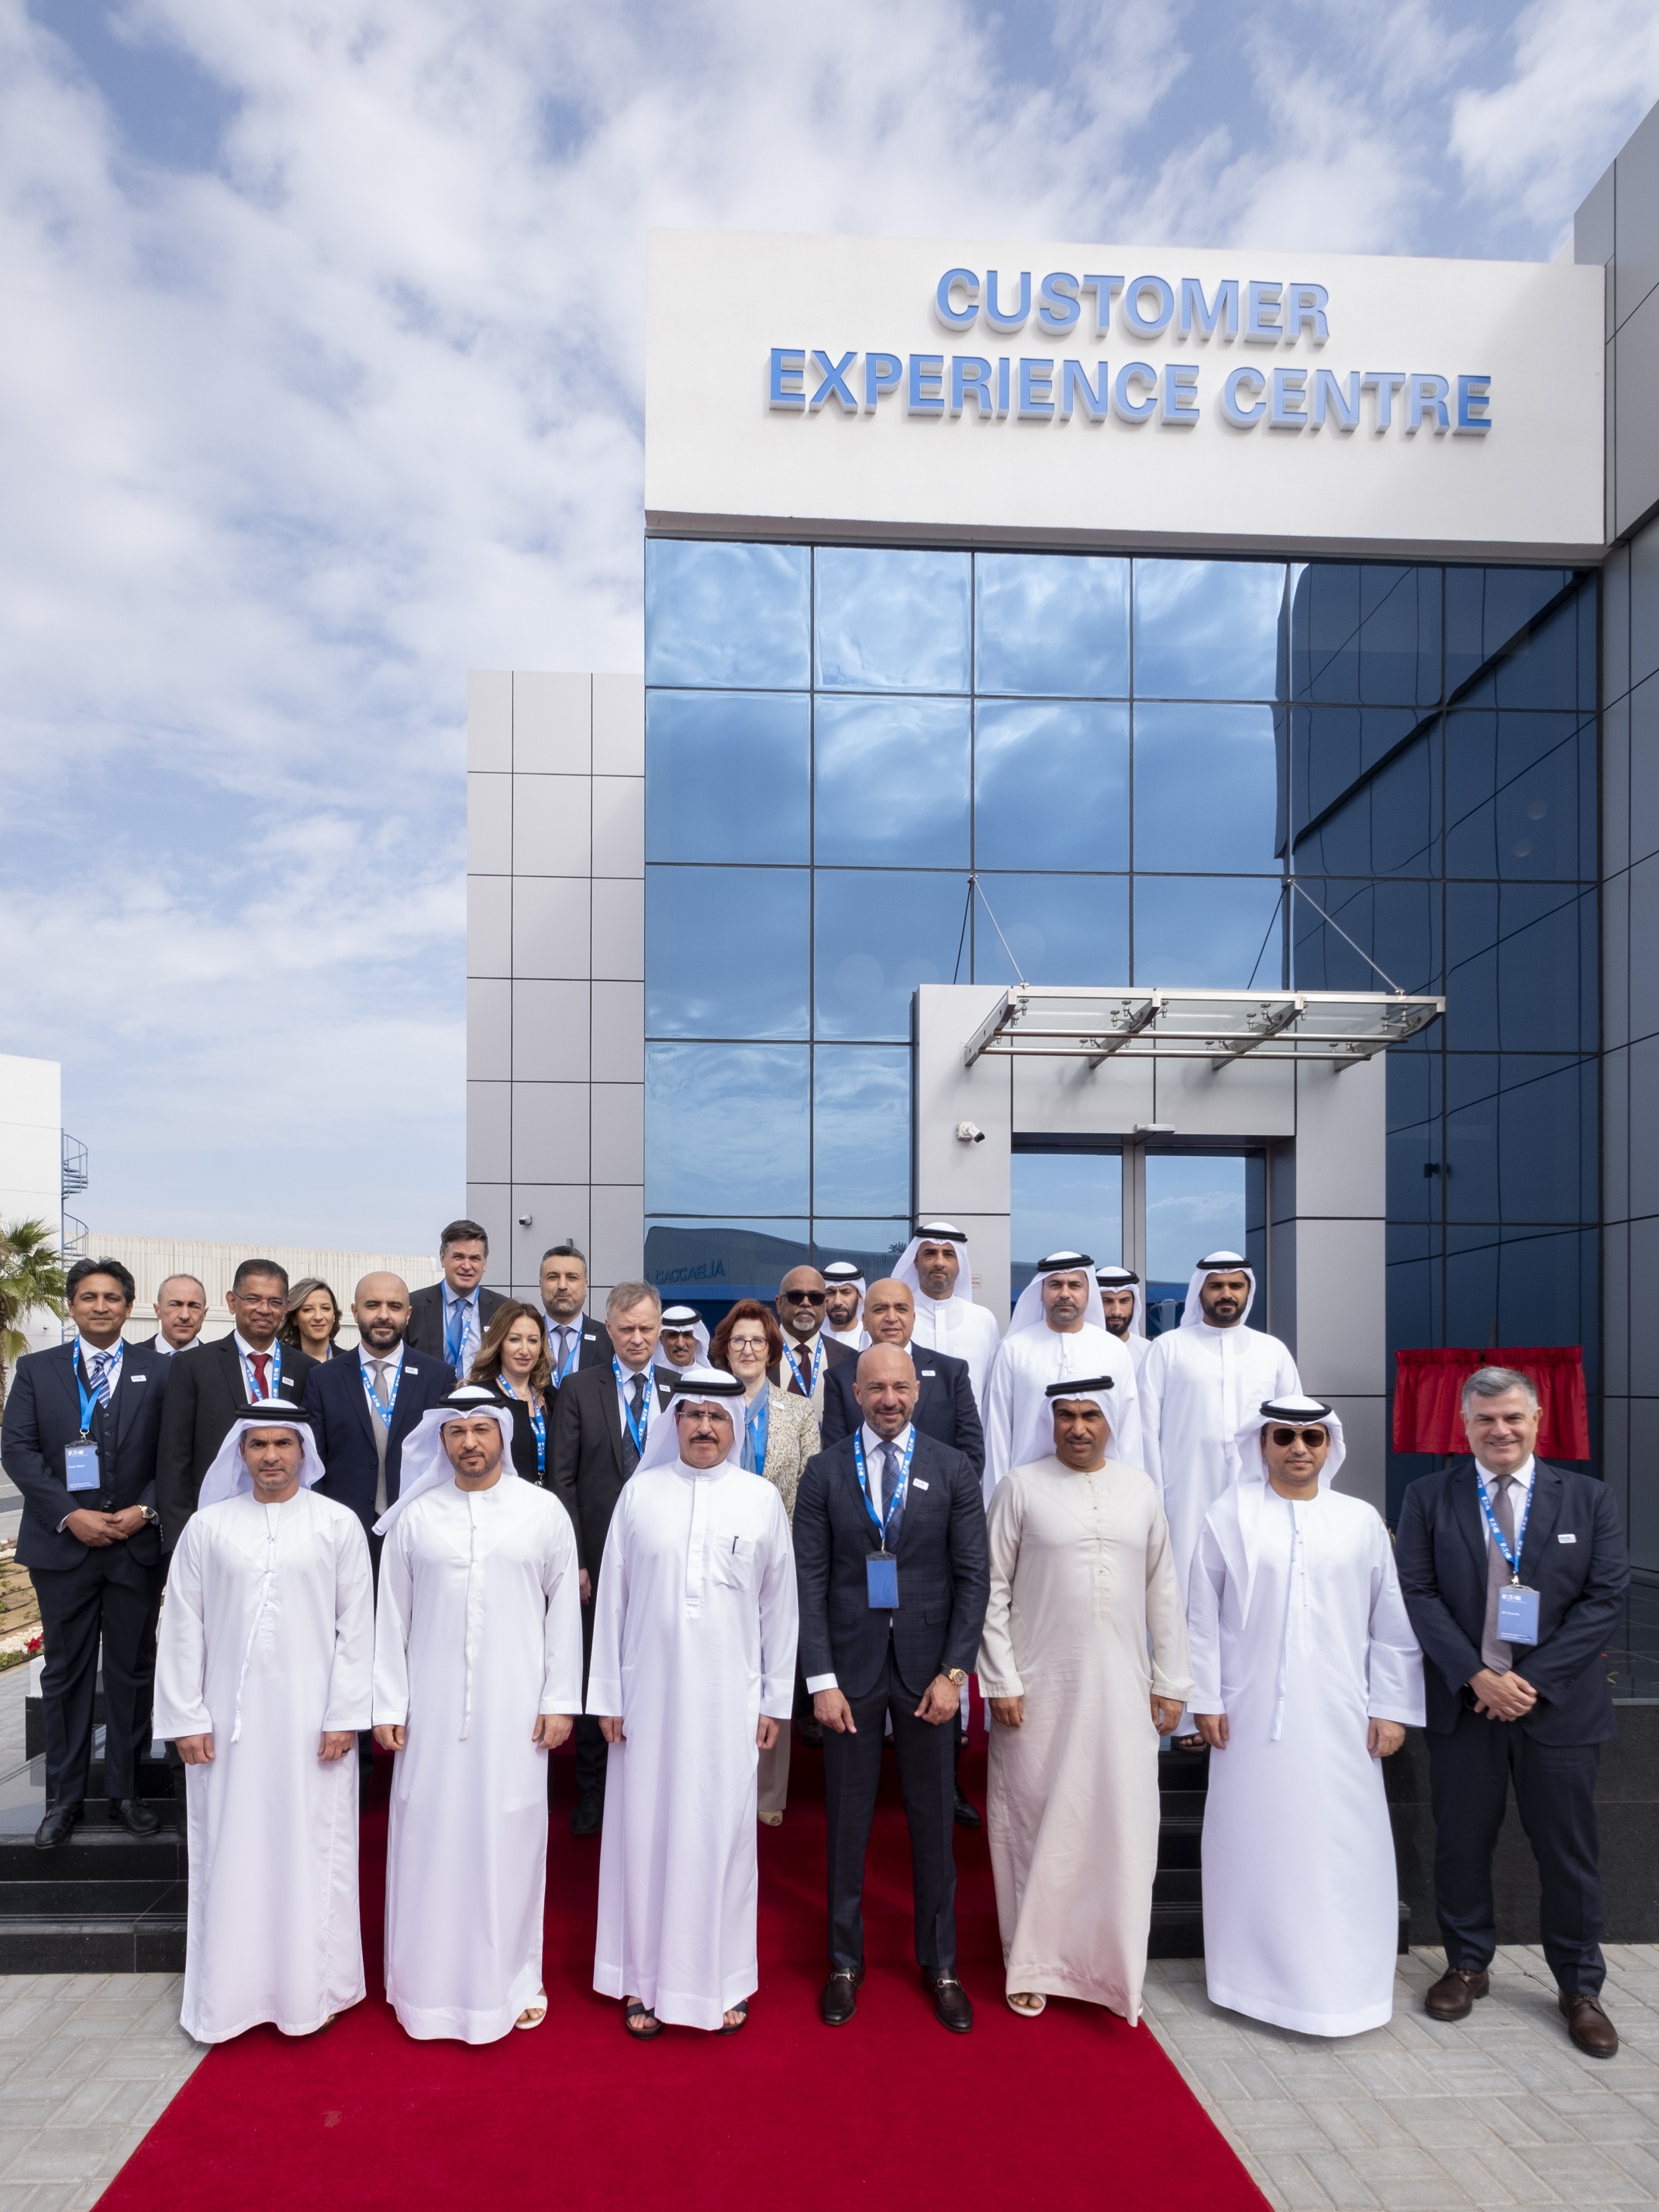 His Excellency Saeed Mohammed Al Tayer Inaugurates Eaton’s NewCustomer Experience Centre in Dubai